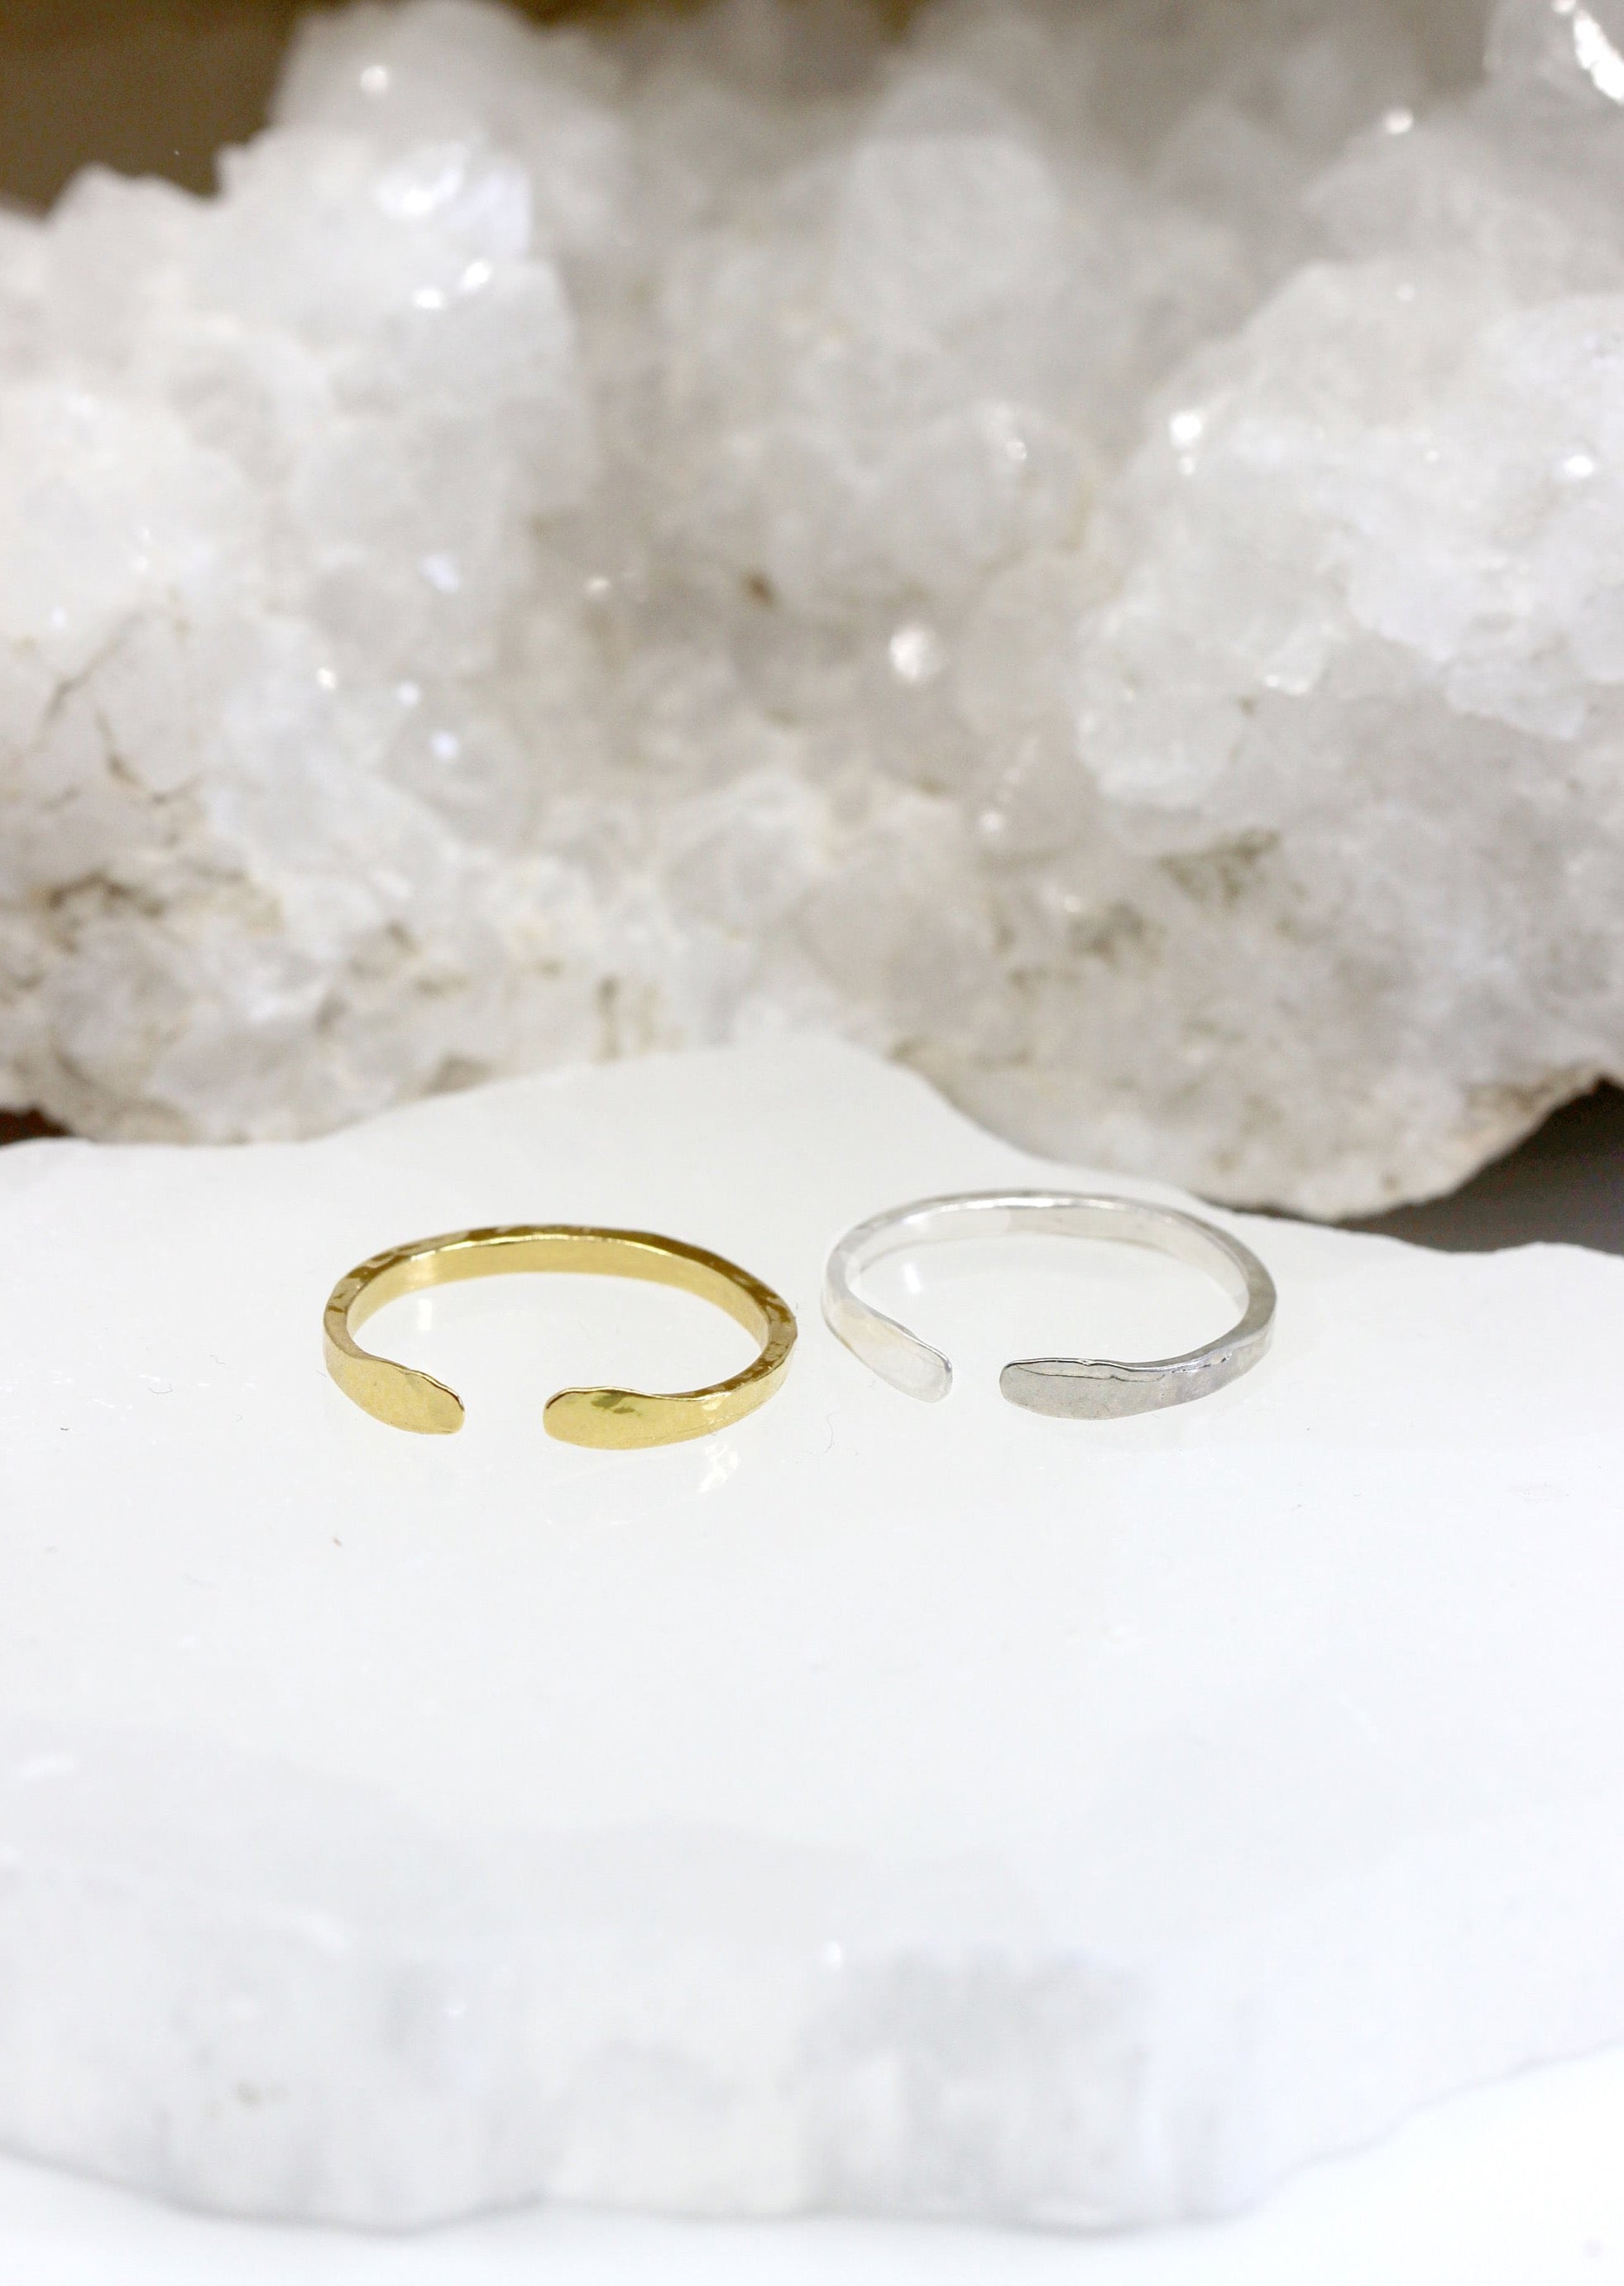 Adjustable Hammered Ring - A versatile and stylish accessory that combines timeless design with adjustable comfort. Handcrafted with precision, this ring features a hammered texture for a unique and elegant look. Available in various sizes and metals, including Gold, Gold Vermeil, and Sterling Silver, it's the perfect choice for those who value both style and flexibility in their jewelry collection. This ring is handmade by Blackbird Jewelry.